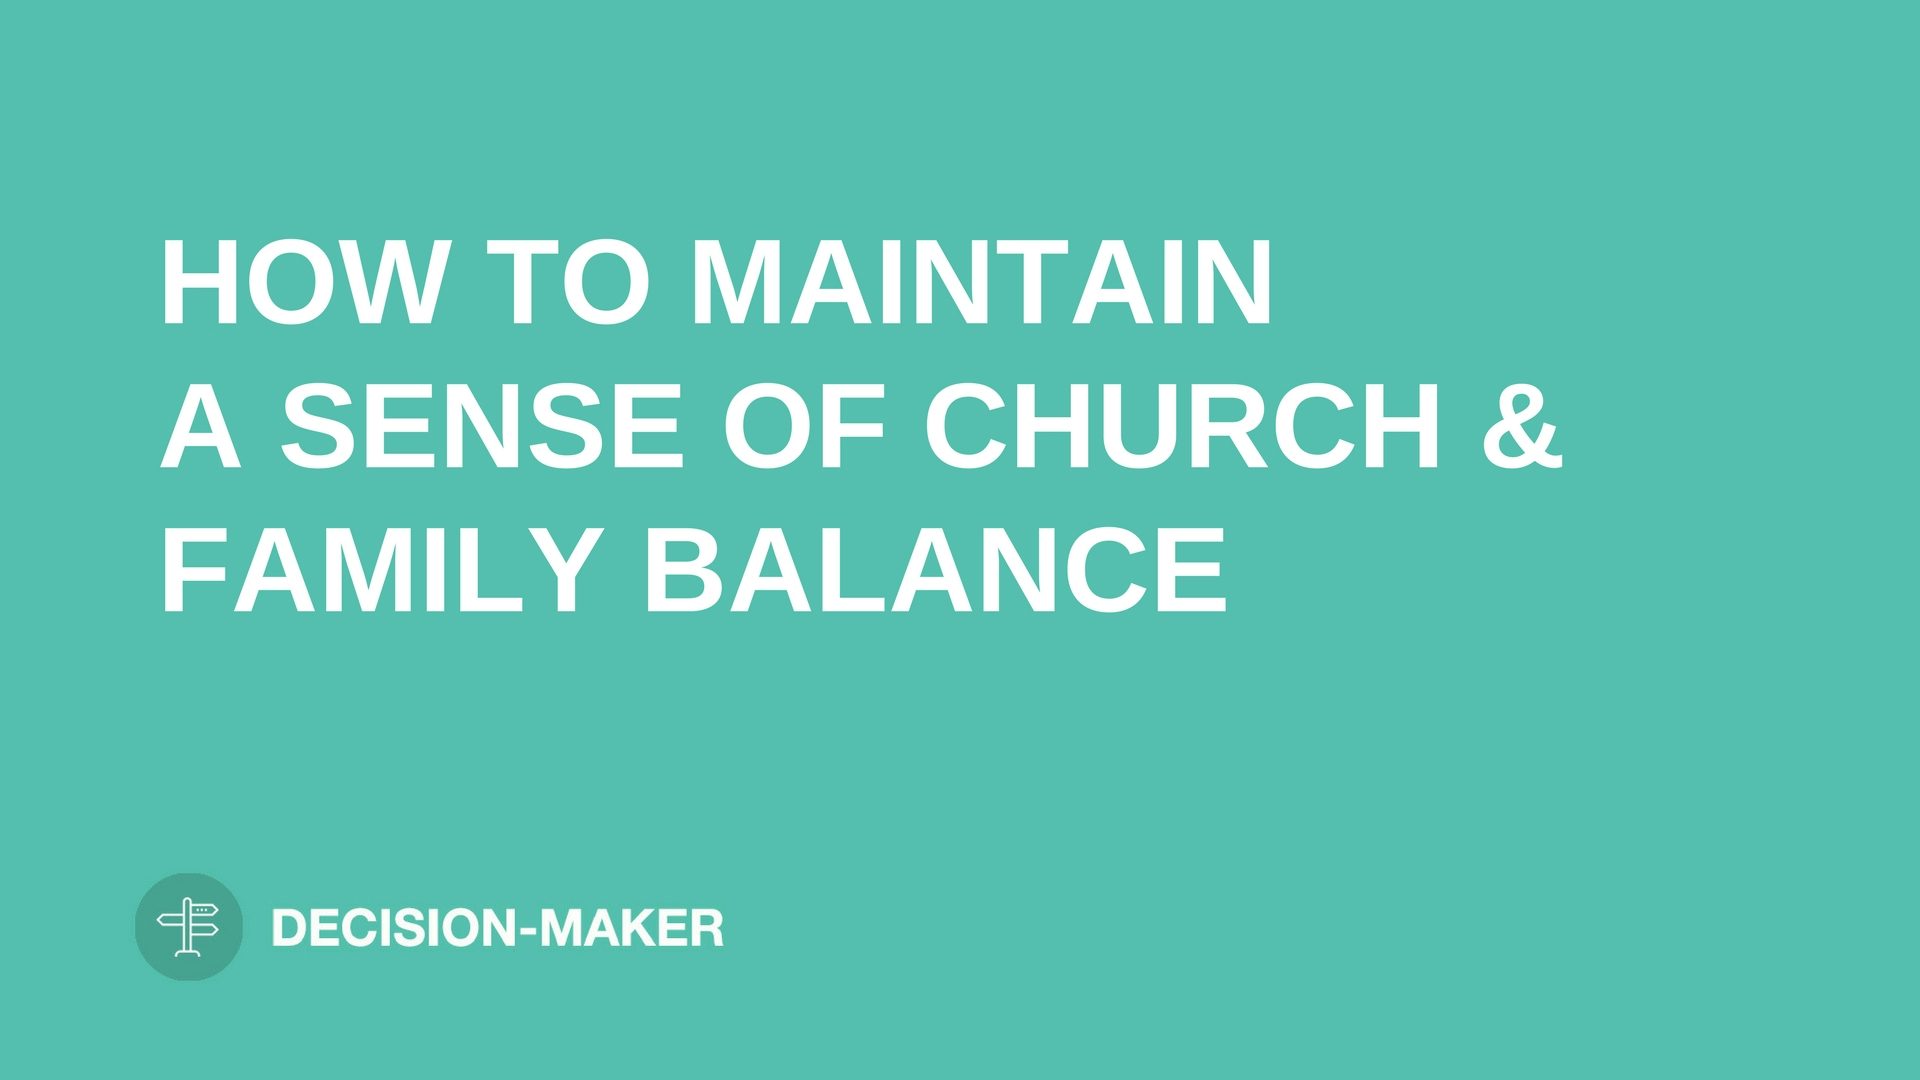 text "MAINTAIN A SENSE OF CHURCH AND FAMILY BALANCE" on light blue background leaders.church